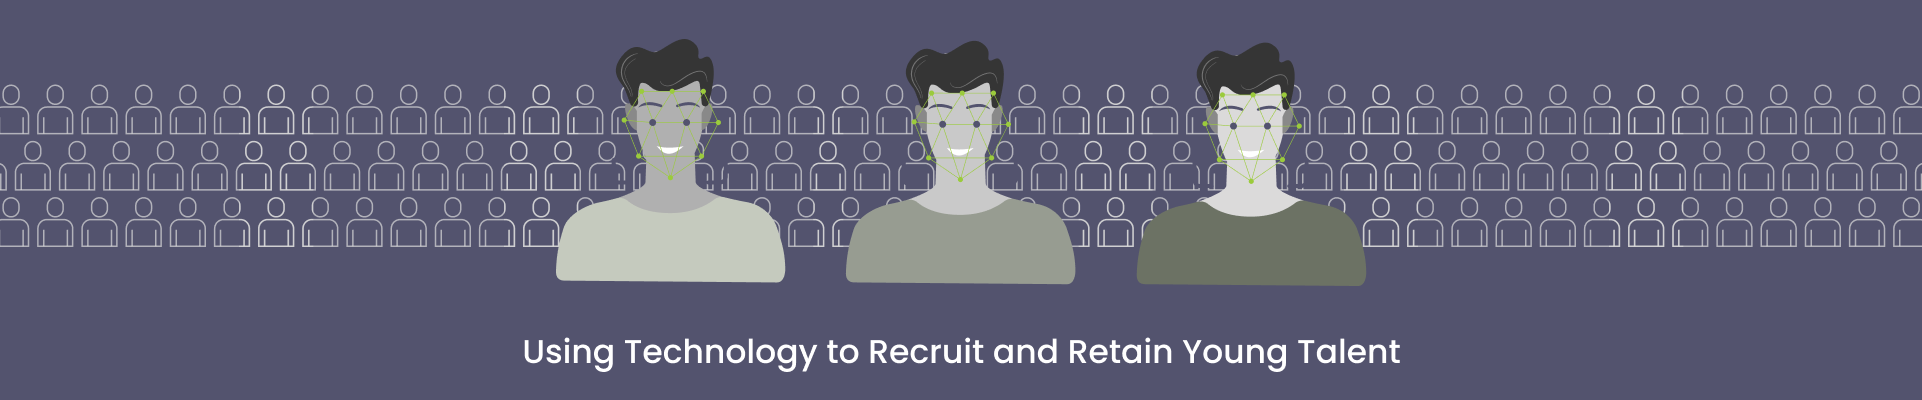 Use Technology to Recruit and Retain Young Talent